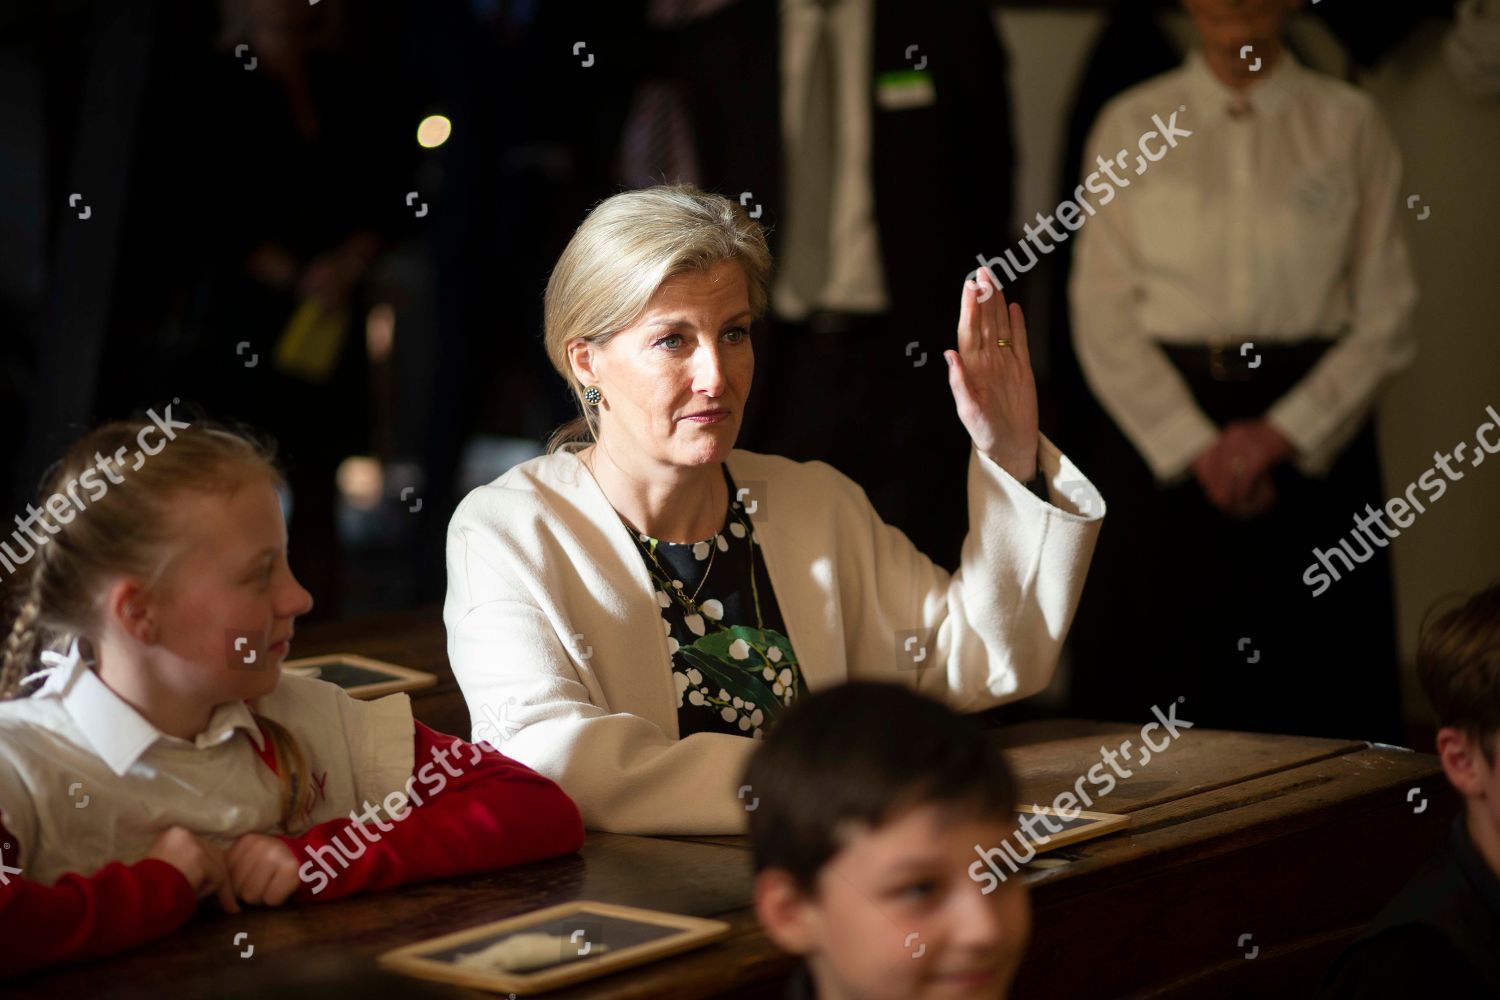 countess-of-wessex-visit-to-somerset-uk-shutterstock-editorial-10120499ao.jpg